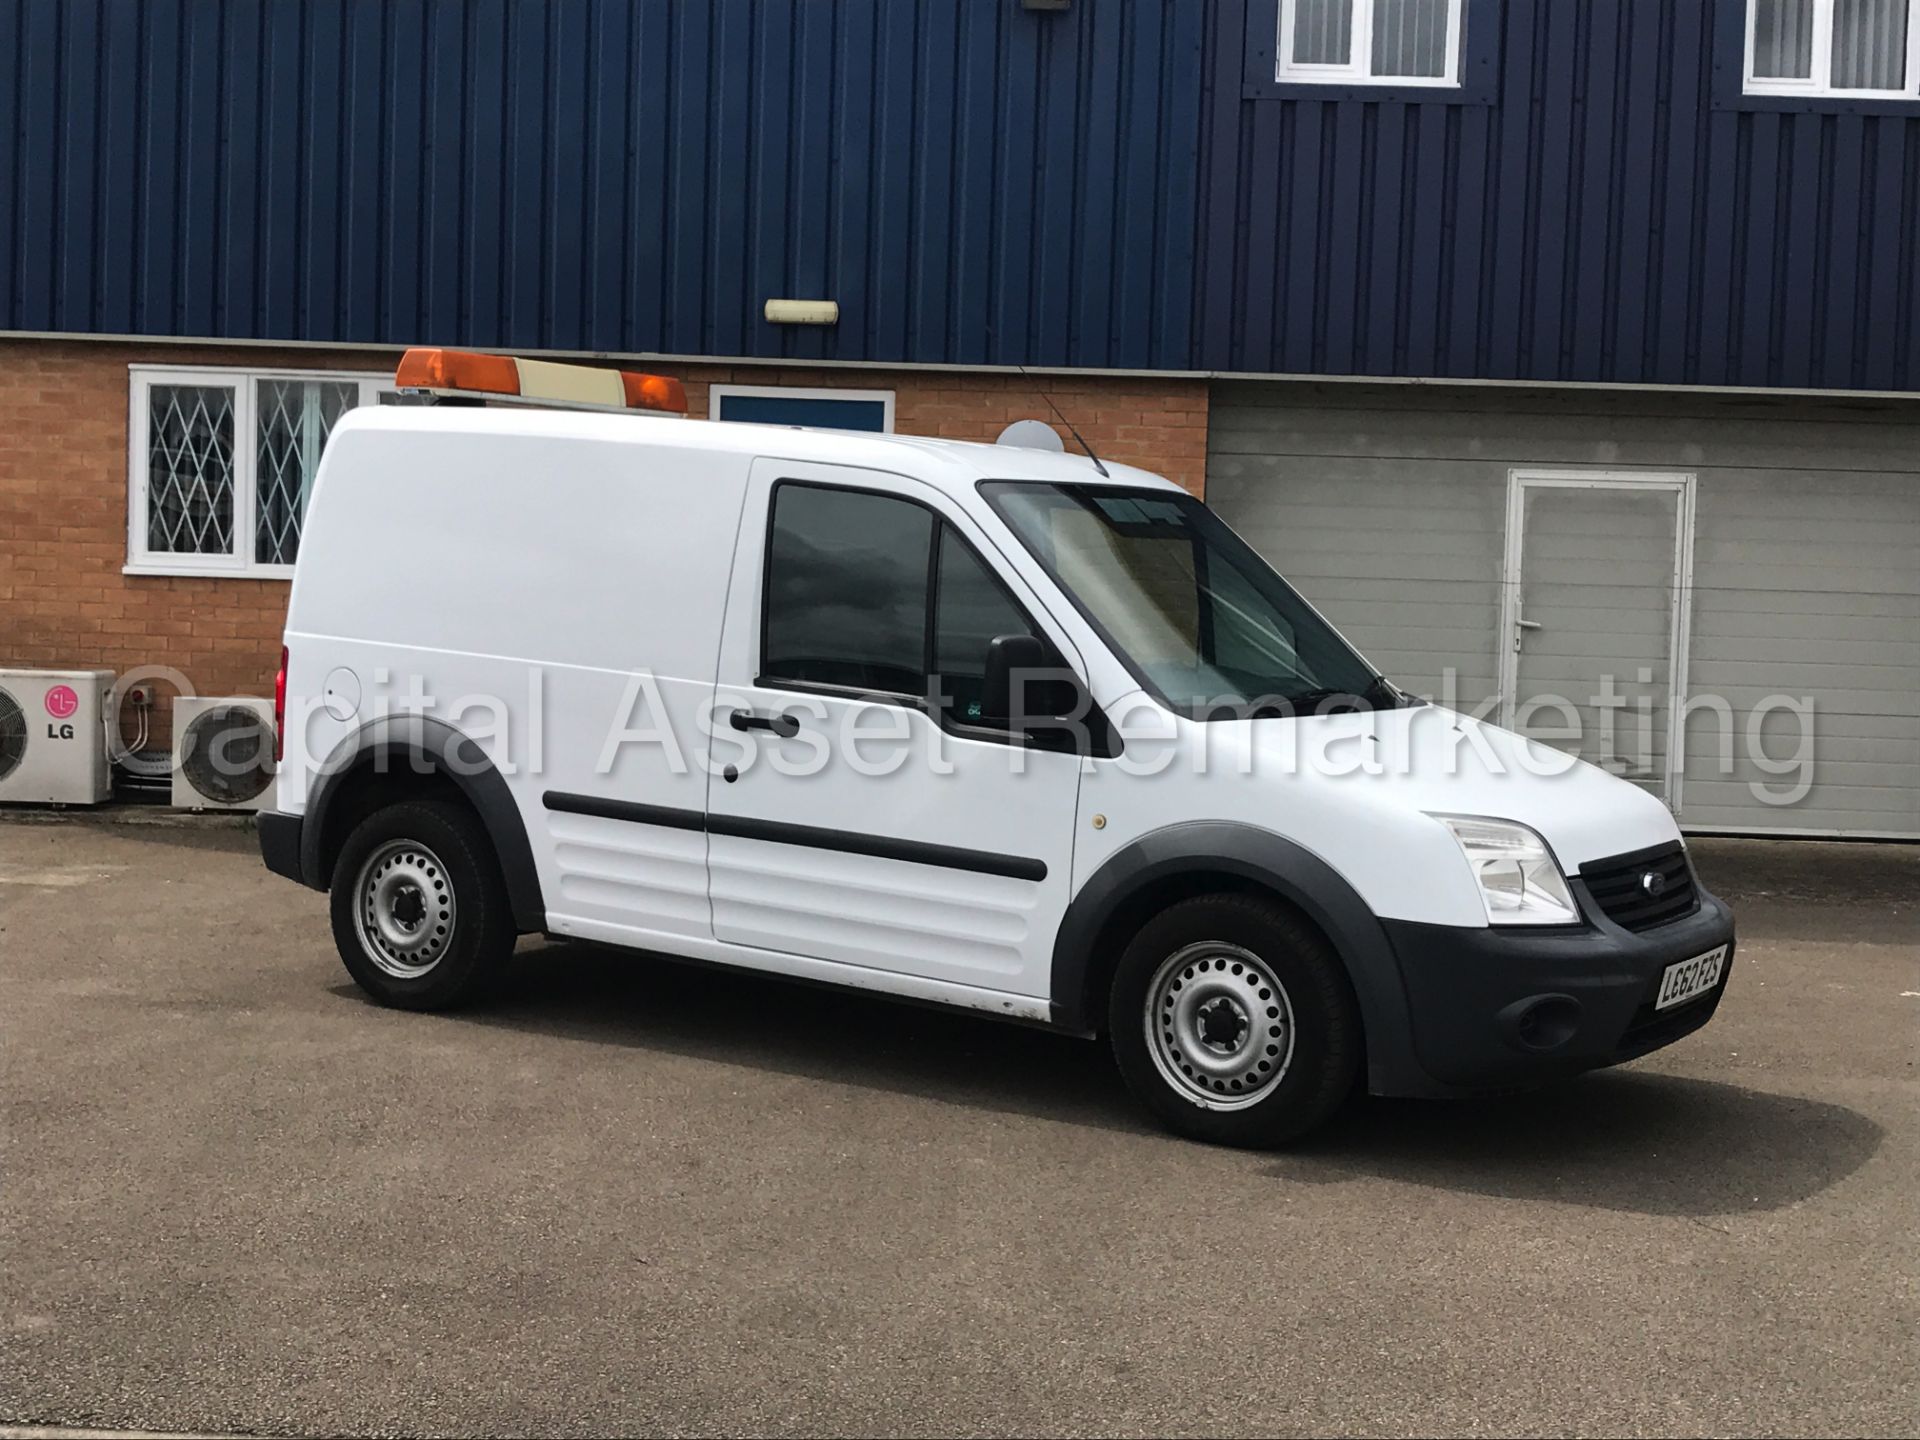 FORD TRANSIT CONNECT 90 T220 (2013 MODEL) '1.8 TDCI - 5 SPEED' *AIR CON* (1 COMPANY OWNER) - Image 10 of 24